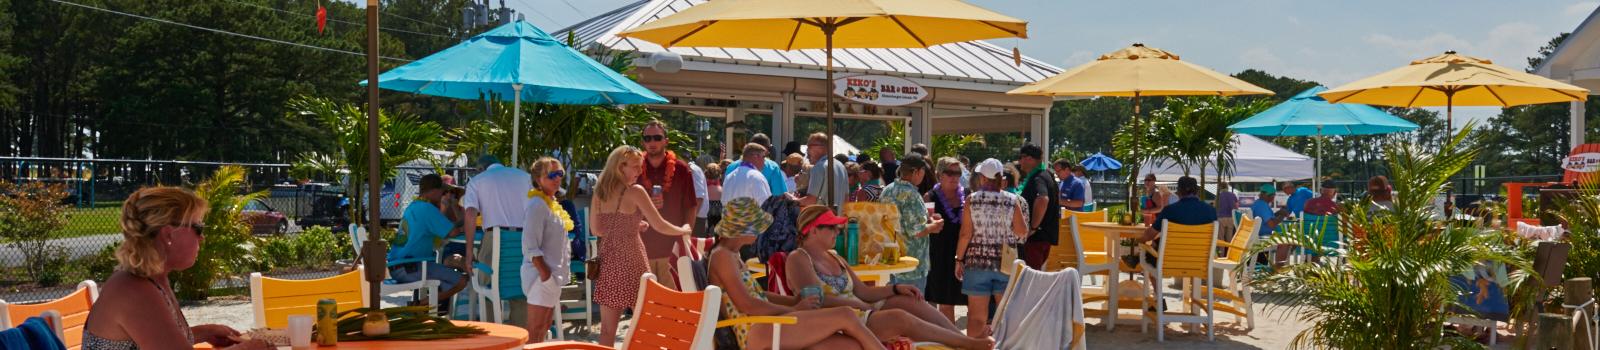 Group of people relaxing at Maui Jack's Waterpark